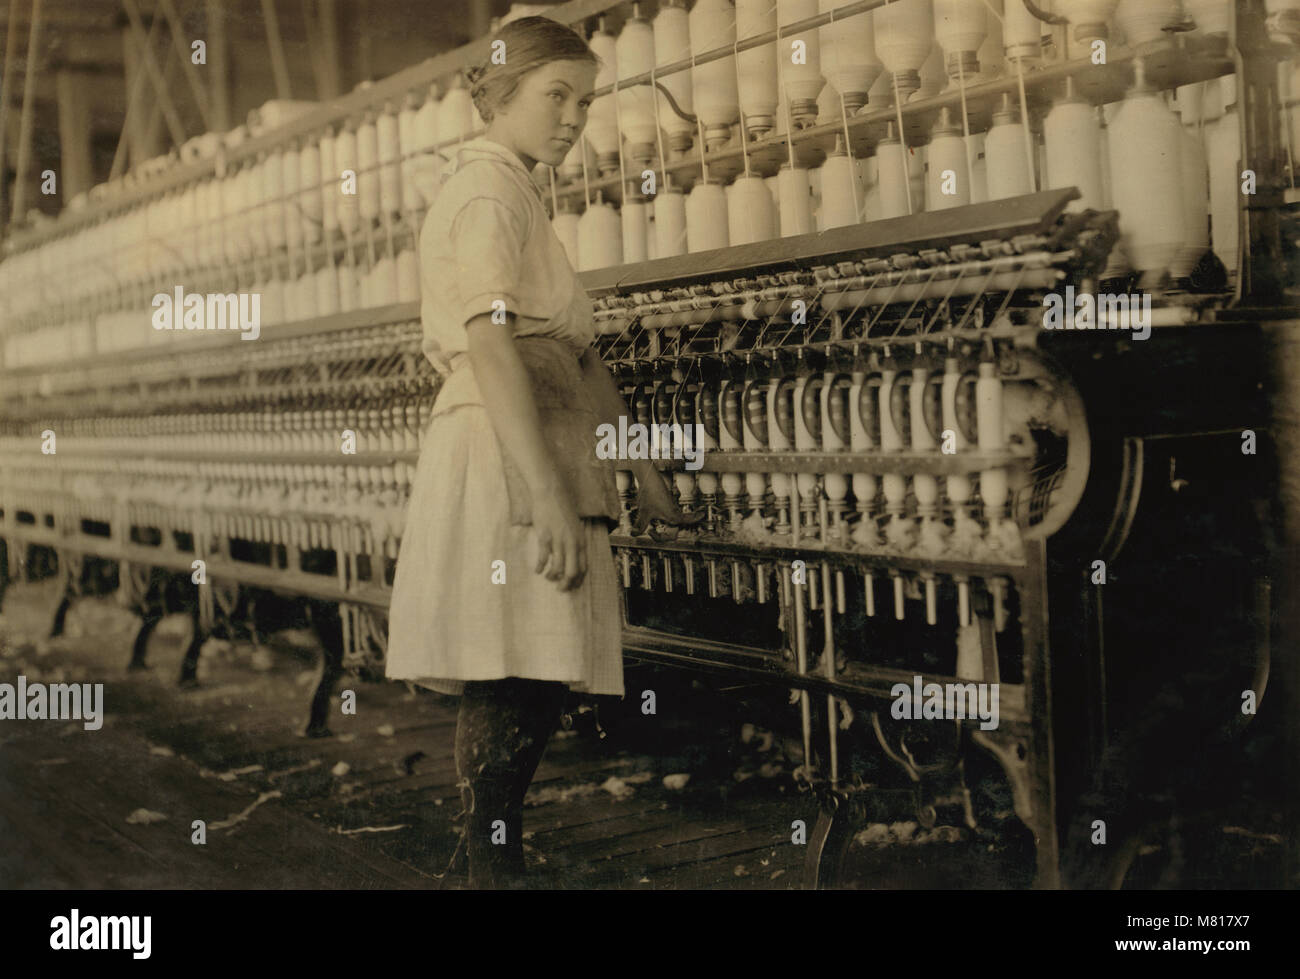 14-year-old Spinner, Full-Length Portrait, Brazos Valley Cotton Mill, West, Texas, USA, Lewis Hine for National Child Labor Committee, November 1913 Stock Photo